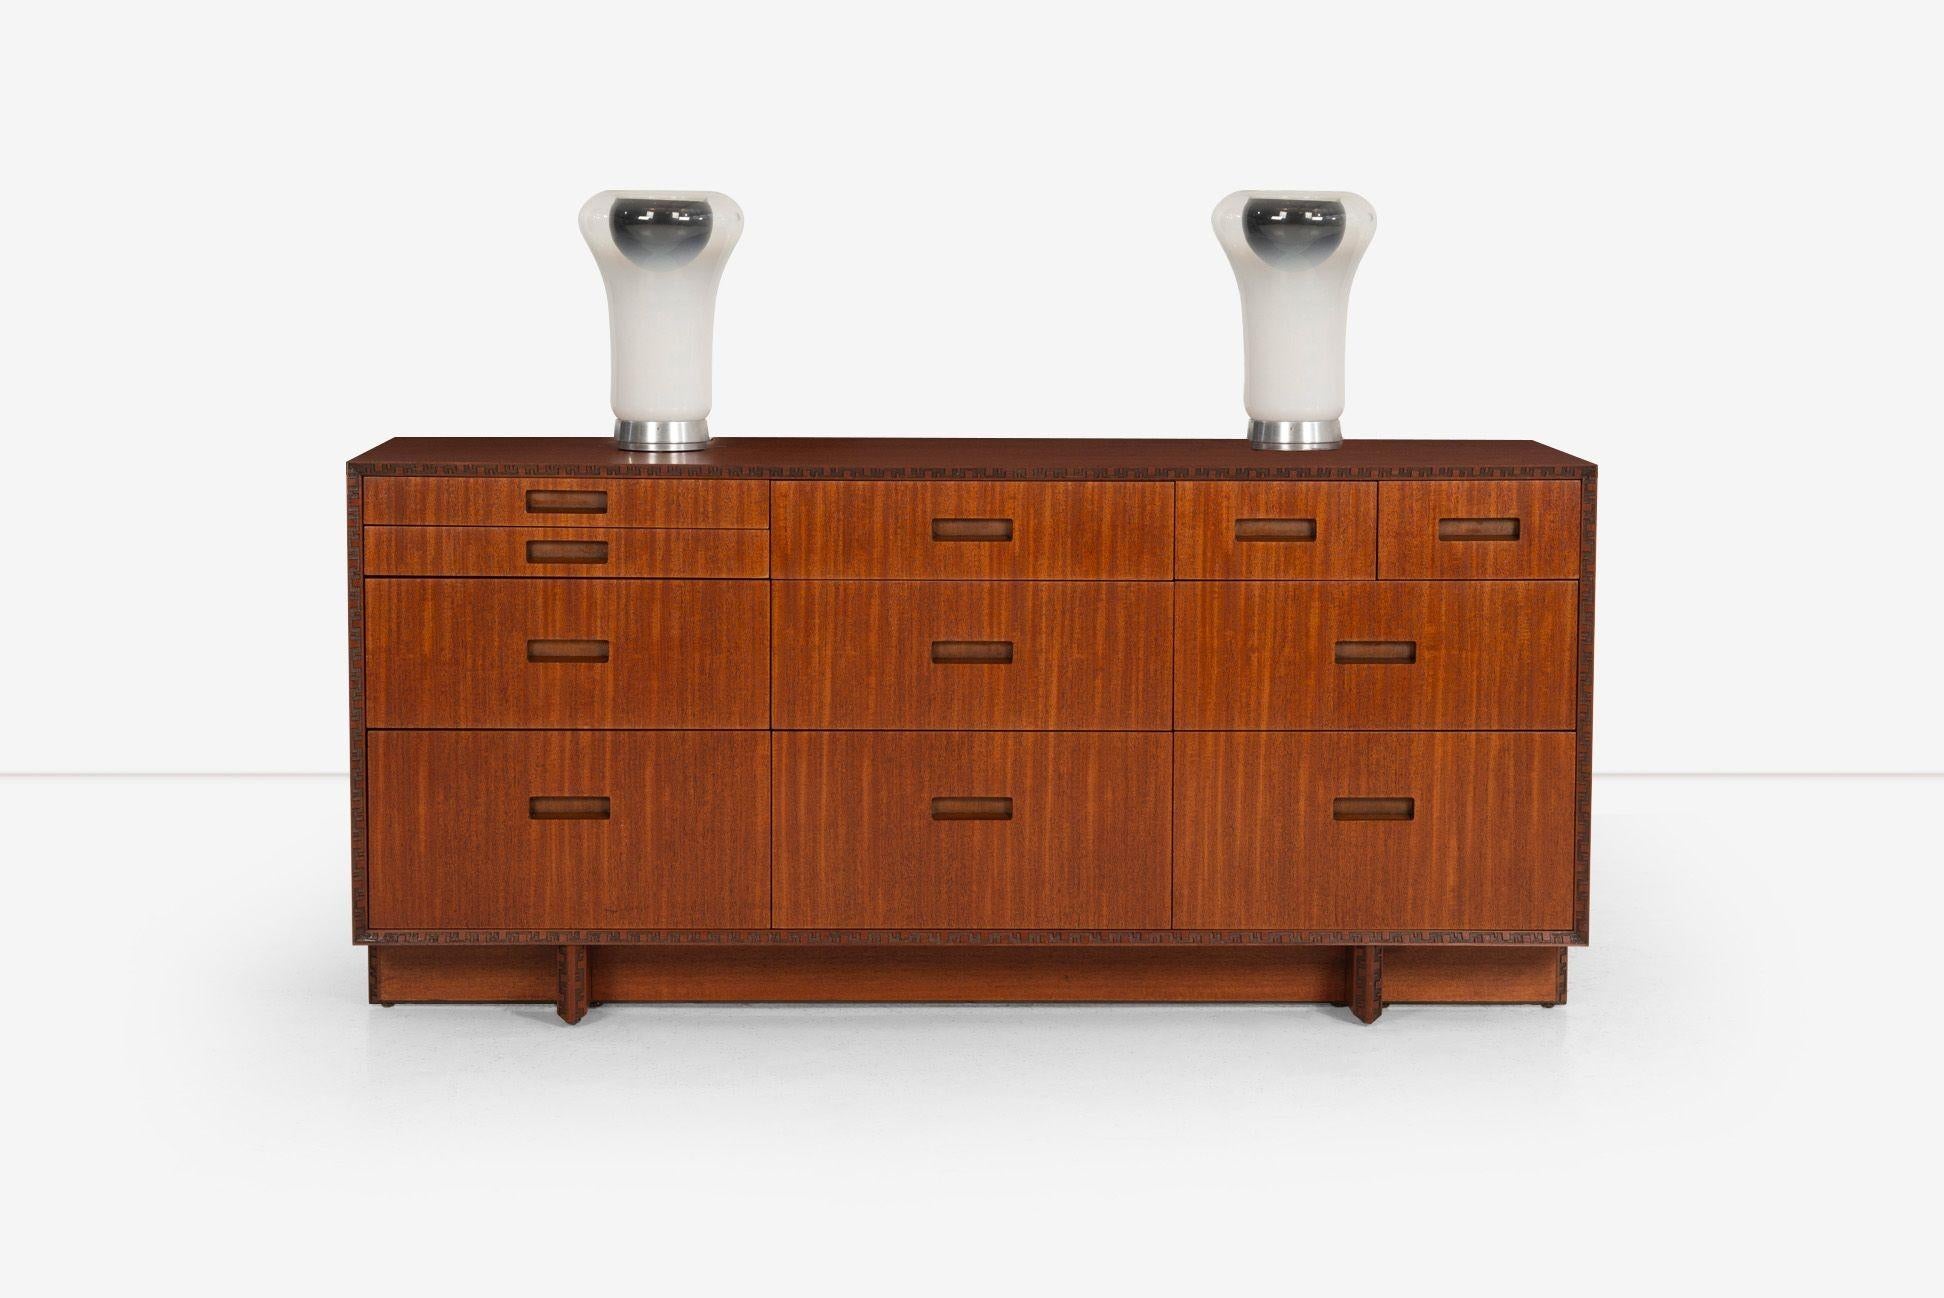 Frank Lloyd Wright Taliesin Line Triple Dresser, Model No. 2000 in Mahogany Wood from 1955. This dresser features eleven drawers with cutout pulls adorned with Taliesin carved motifs on the edges of the case. The plinth base also showcases detailed